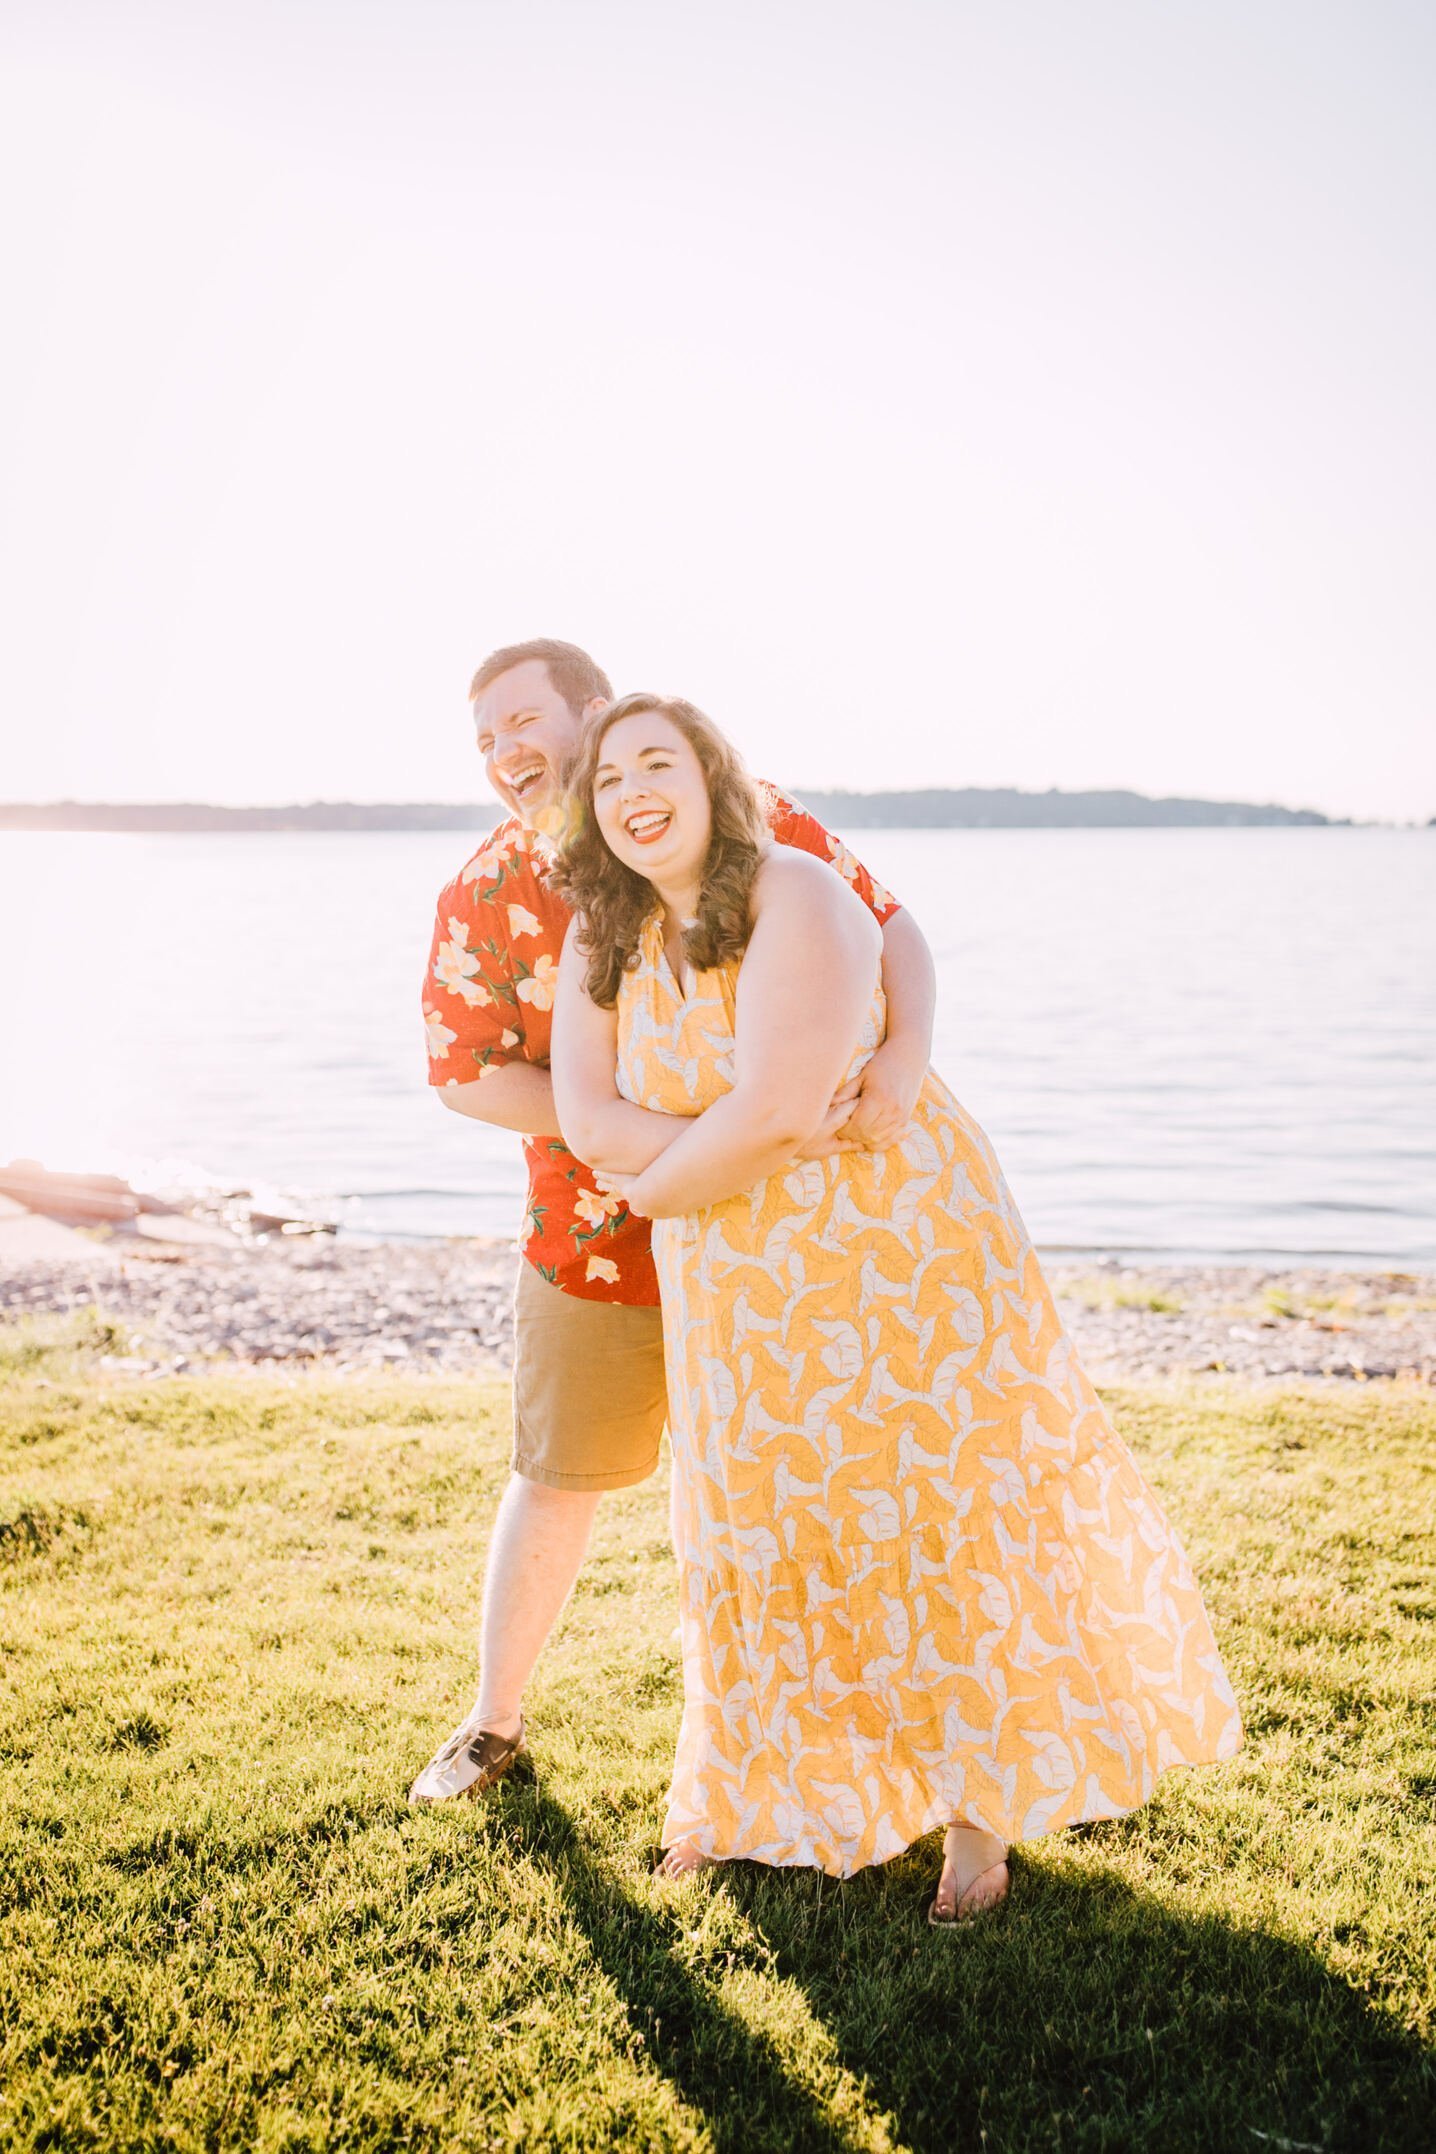  Brandon laughs with his arms wrapped around his fiancé as they dance in a grassy area in front of the lake for sunset engagement photos 